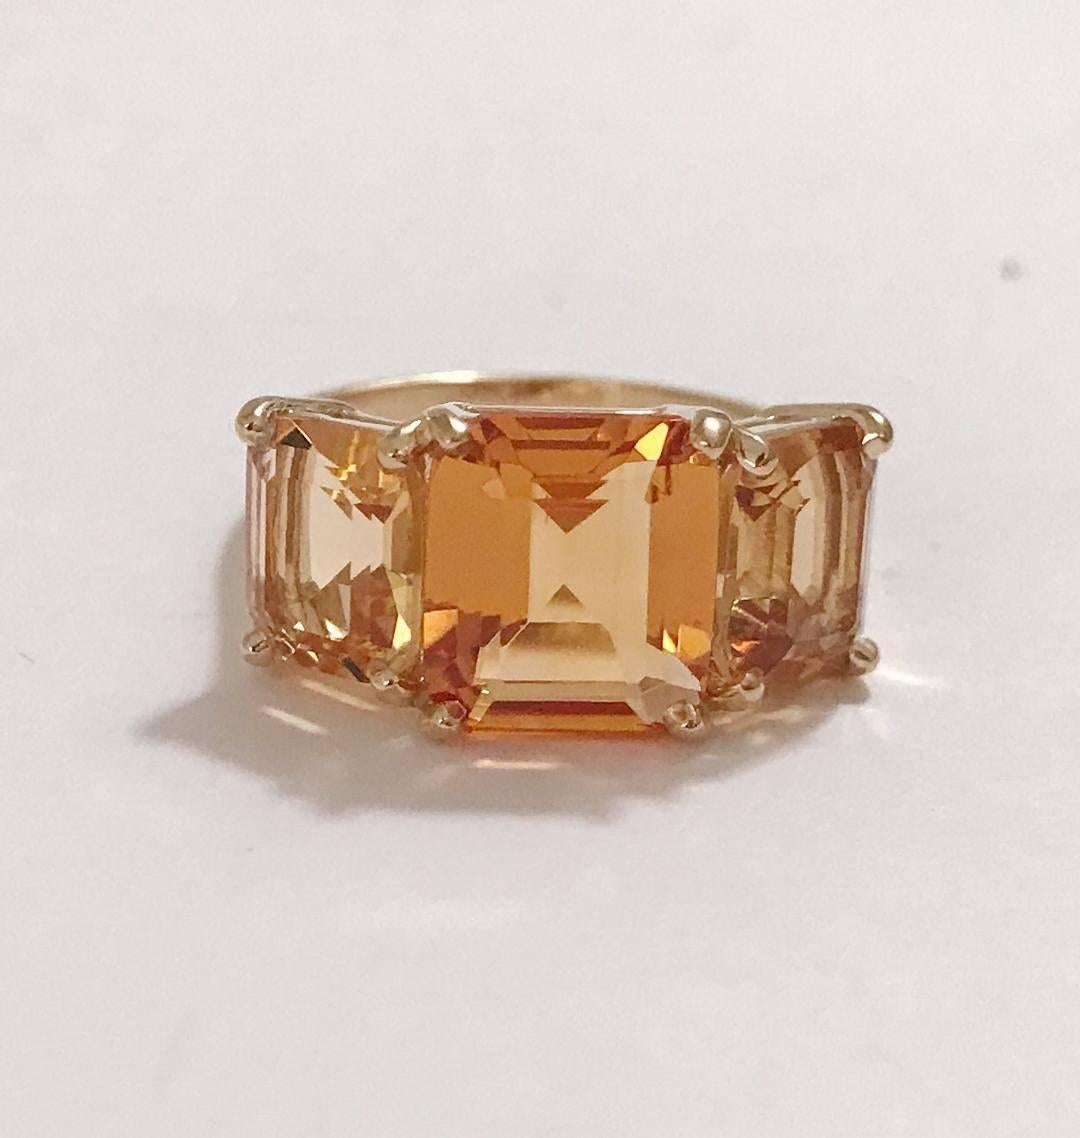 18kt Yellow Gold Mini Emerald Cut Ring with Two Toned Citrine

This mini emerald cut ring can be made in any ring size and with any colored semi precious stone combination. example: Blue Topaz Center and Peridot stones or Pink Topaz Center and